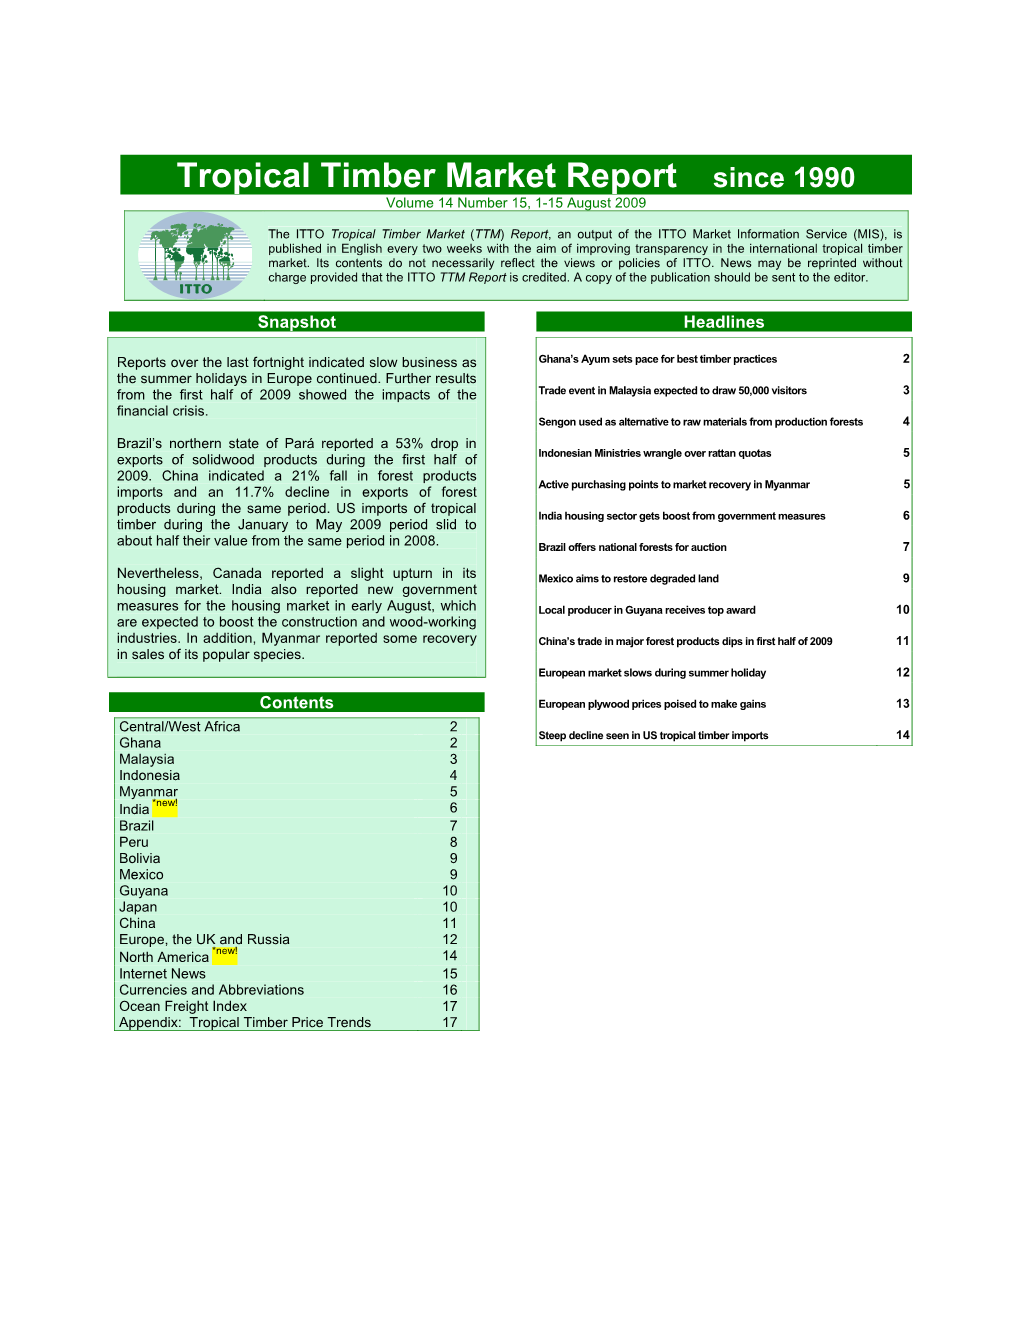 ITTO Tropical Timber Market Report